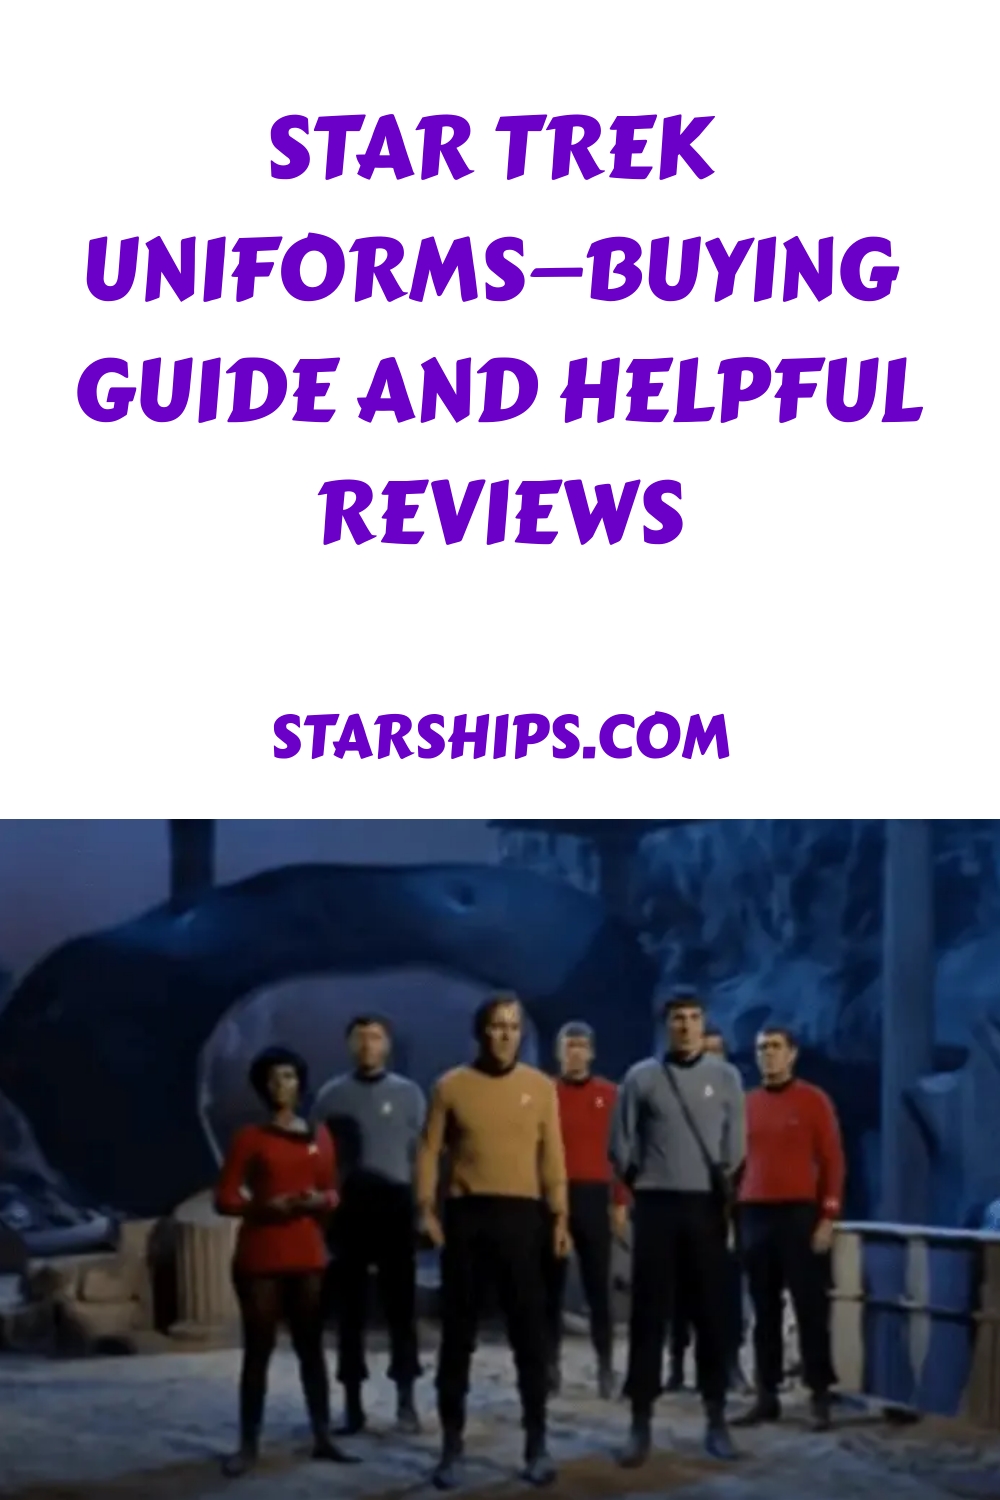 Star Trek Uniforms—Buying Guide and Helpful Reviews generated pin 57231